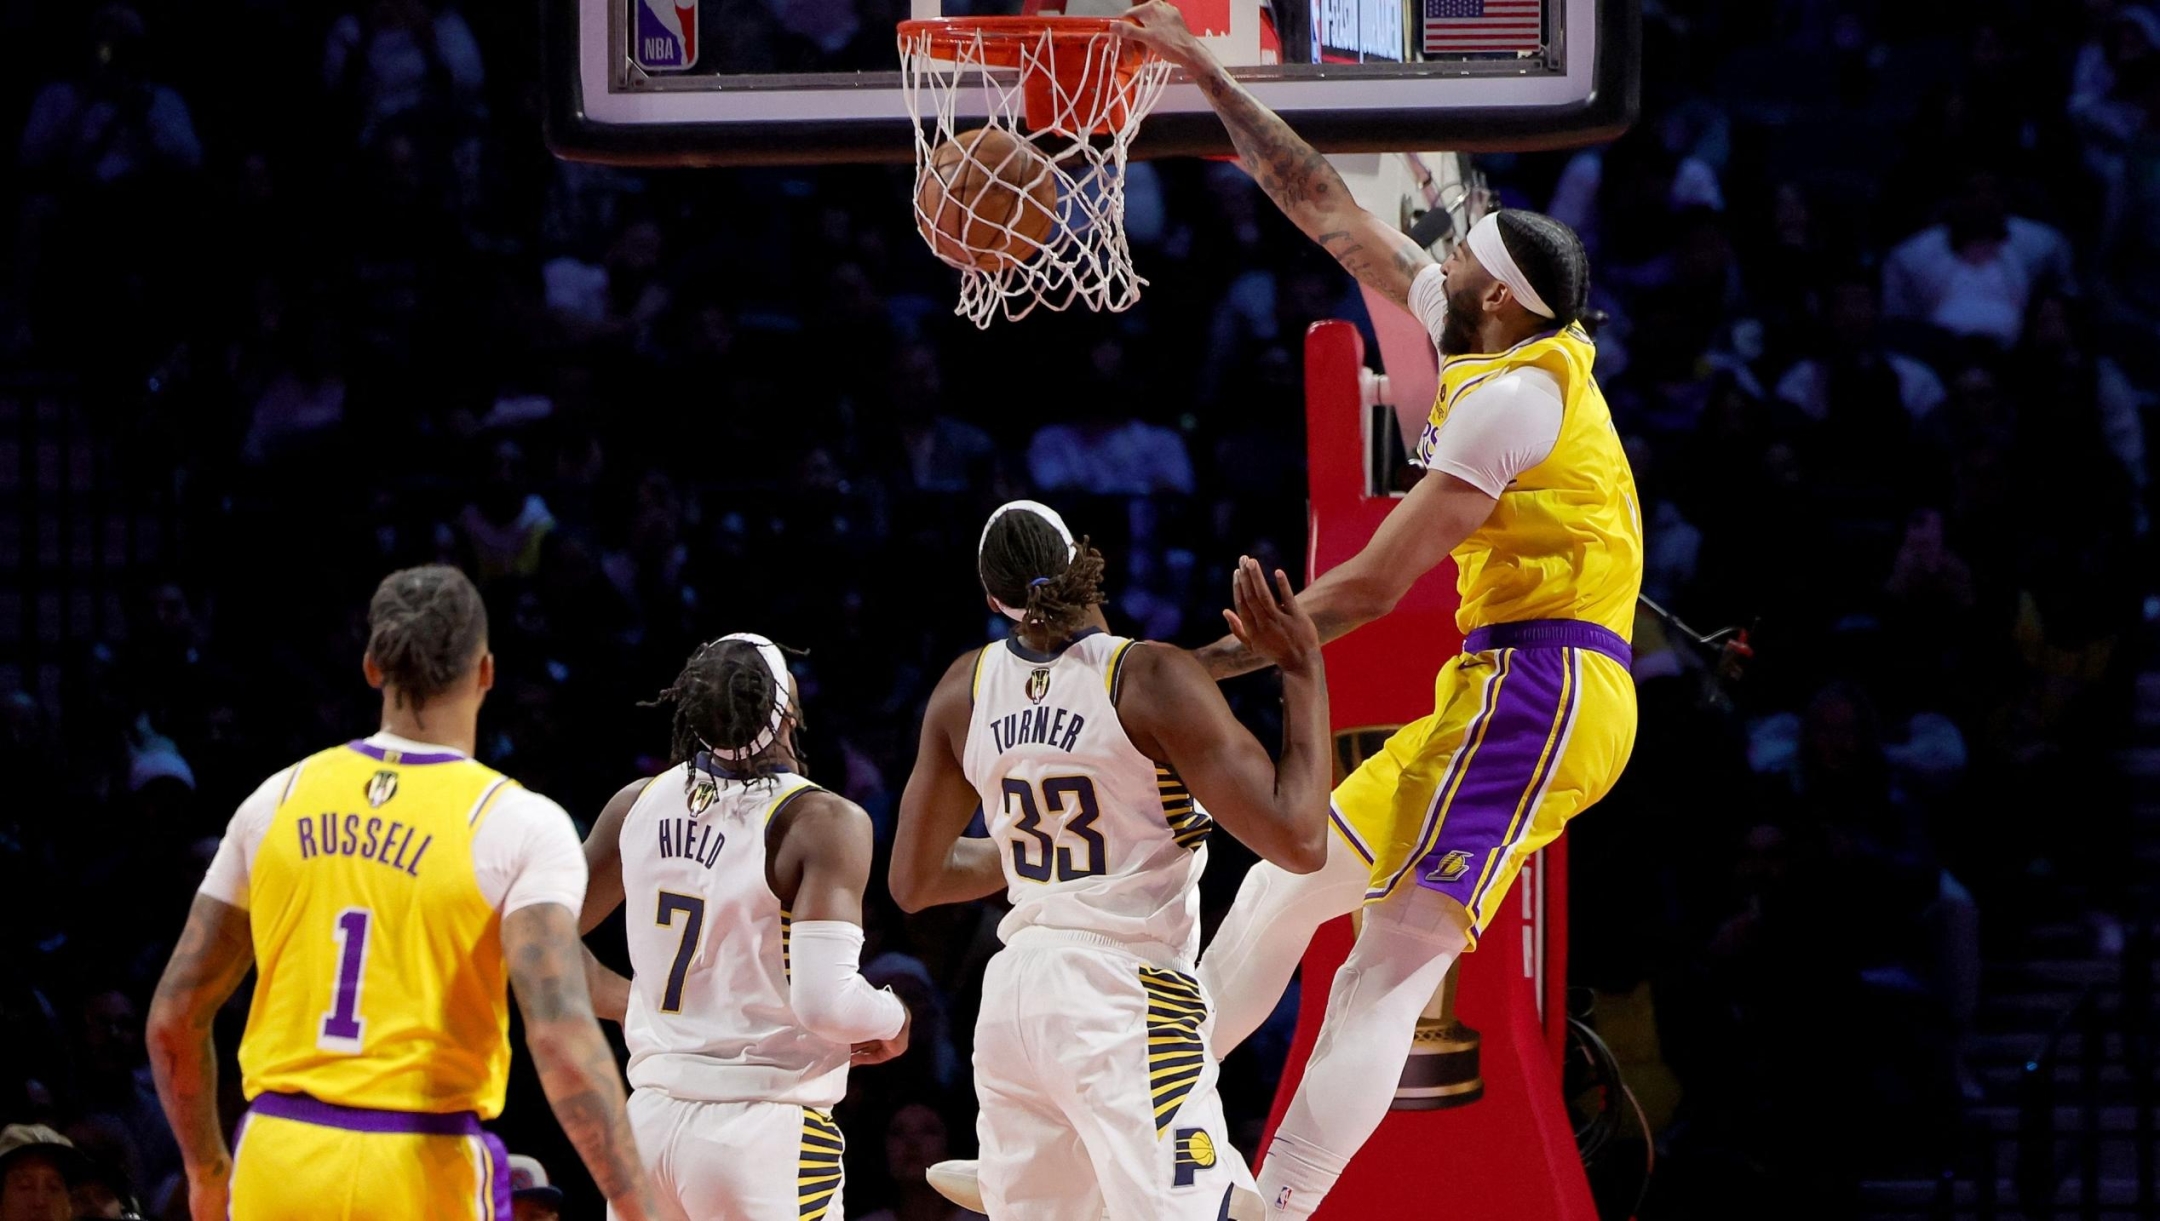 LAS VEGAS, NEVADA - DECEMBER 09: Anthony Davis #3 of the Los Angeles Lakers dunks the ball against Myles Turner #33 of the Indiana Pacers during the fourth quarter in the championship game of the inaugural NBA In-Season Tournament at T-Mobile Arena on December 09, 2023 in Las Vegas, Nevada. NOTE TO USER: User expressly acknowledges and agrees that, by downloading and or using this photograph, User is consenting to the terms and conditions of the Getty Images License Agreement.   Ethan Miller/Getty Images/AFP (Photo by Ethan Miller / GETTY IMAGES NORTH AMERICA / Getty Images via AFP)